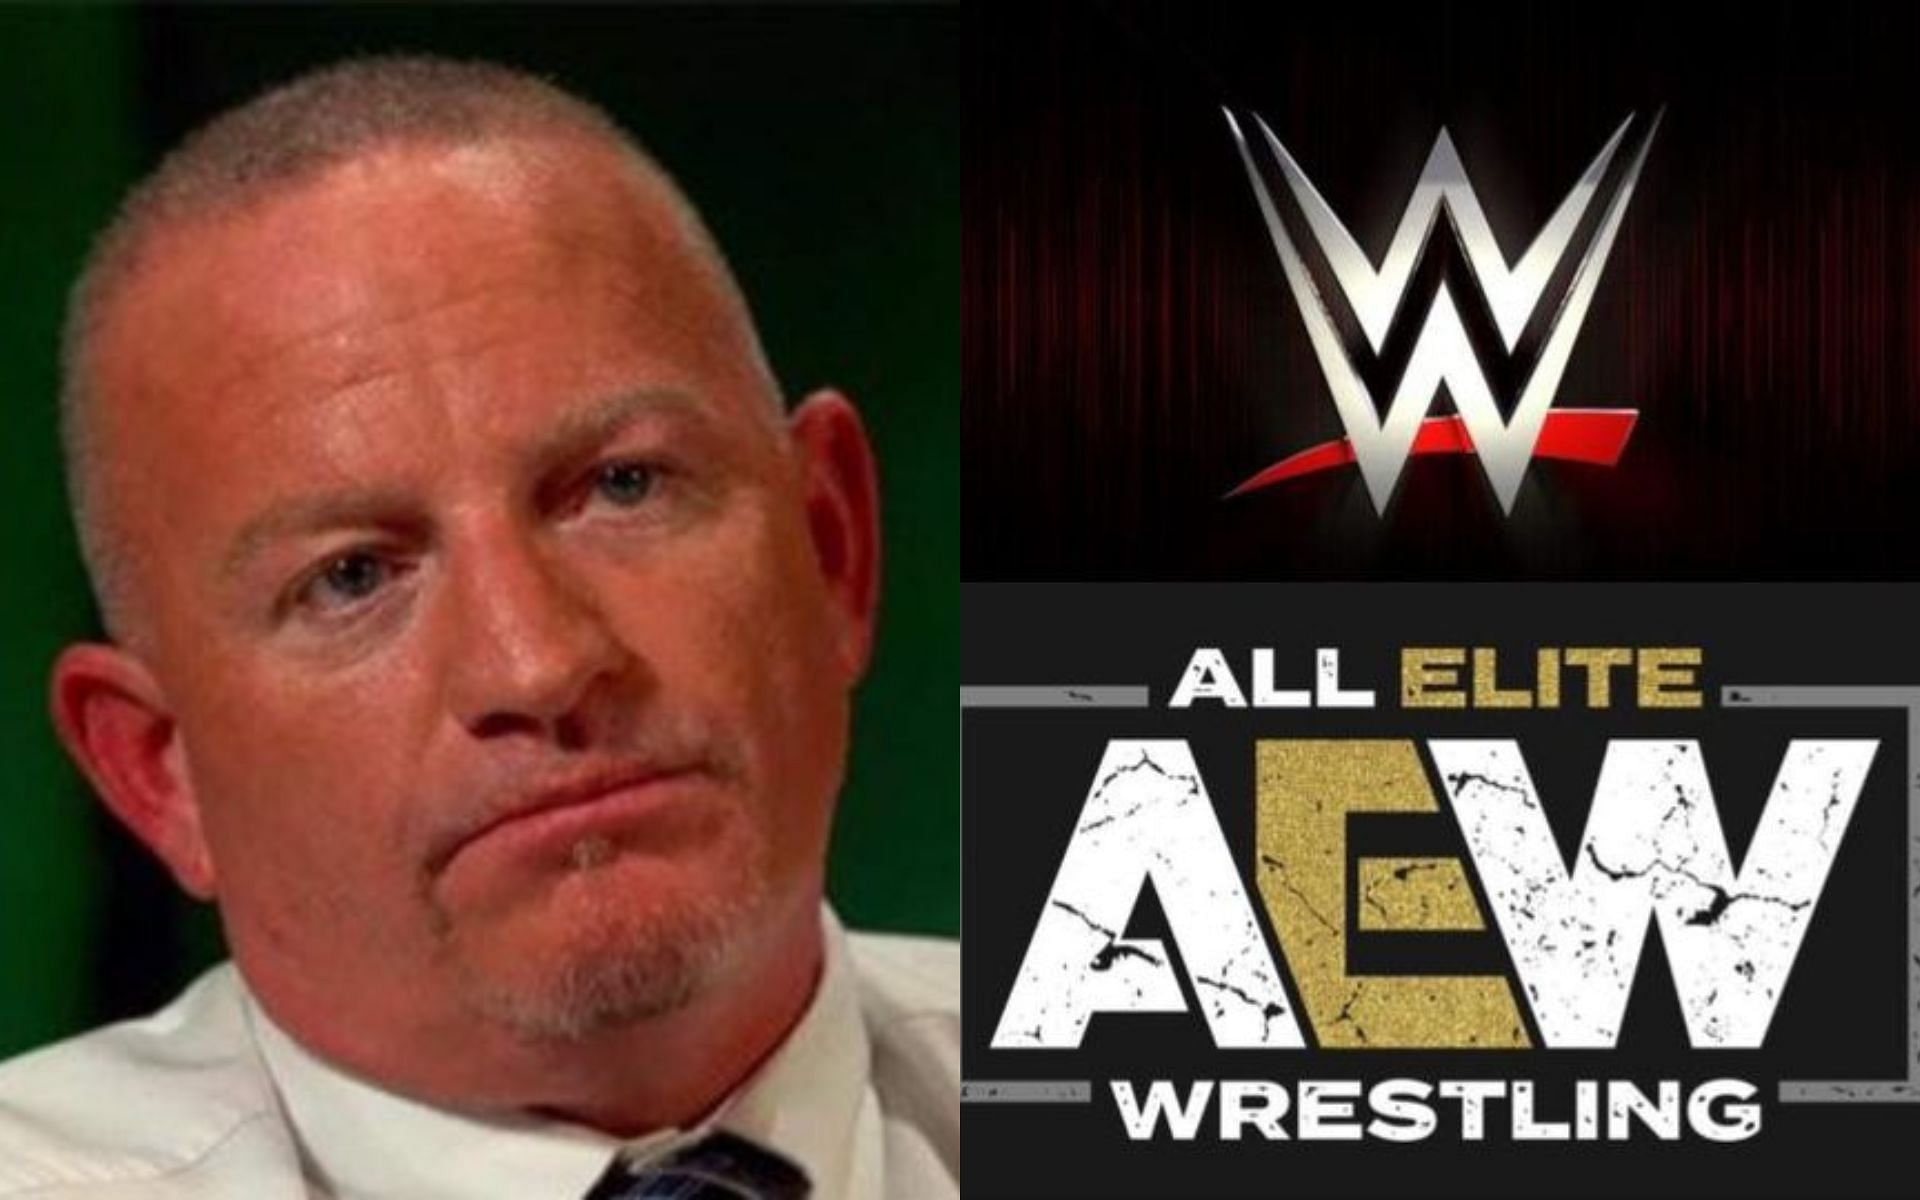 Road Dogg (left) and AEW and WWE logos (right)